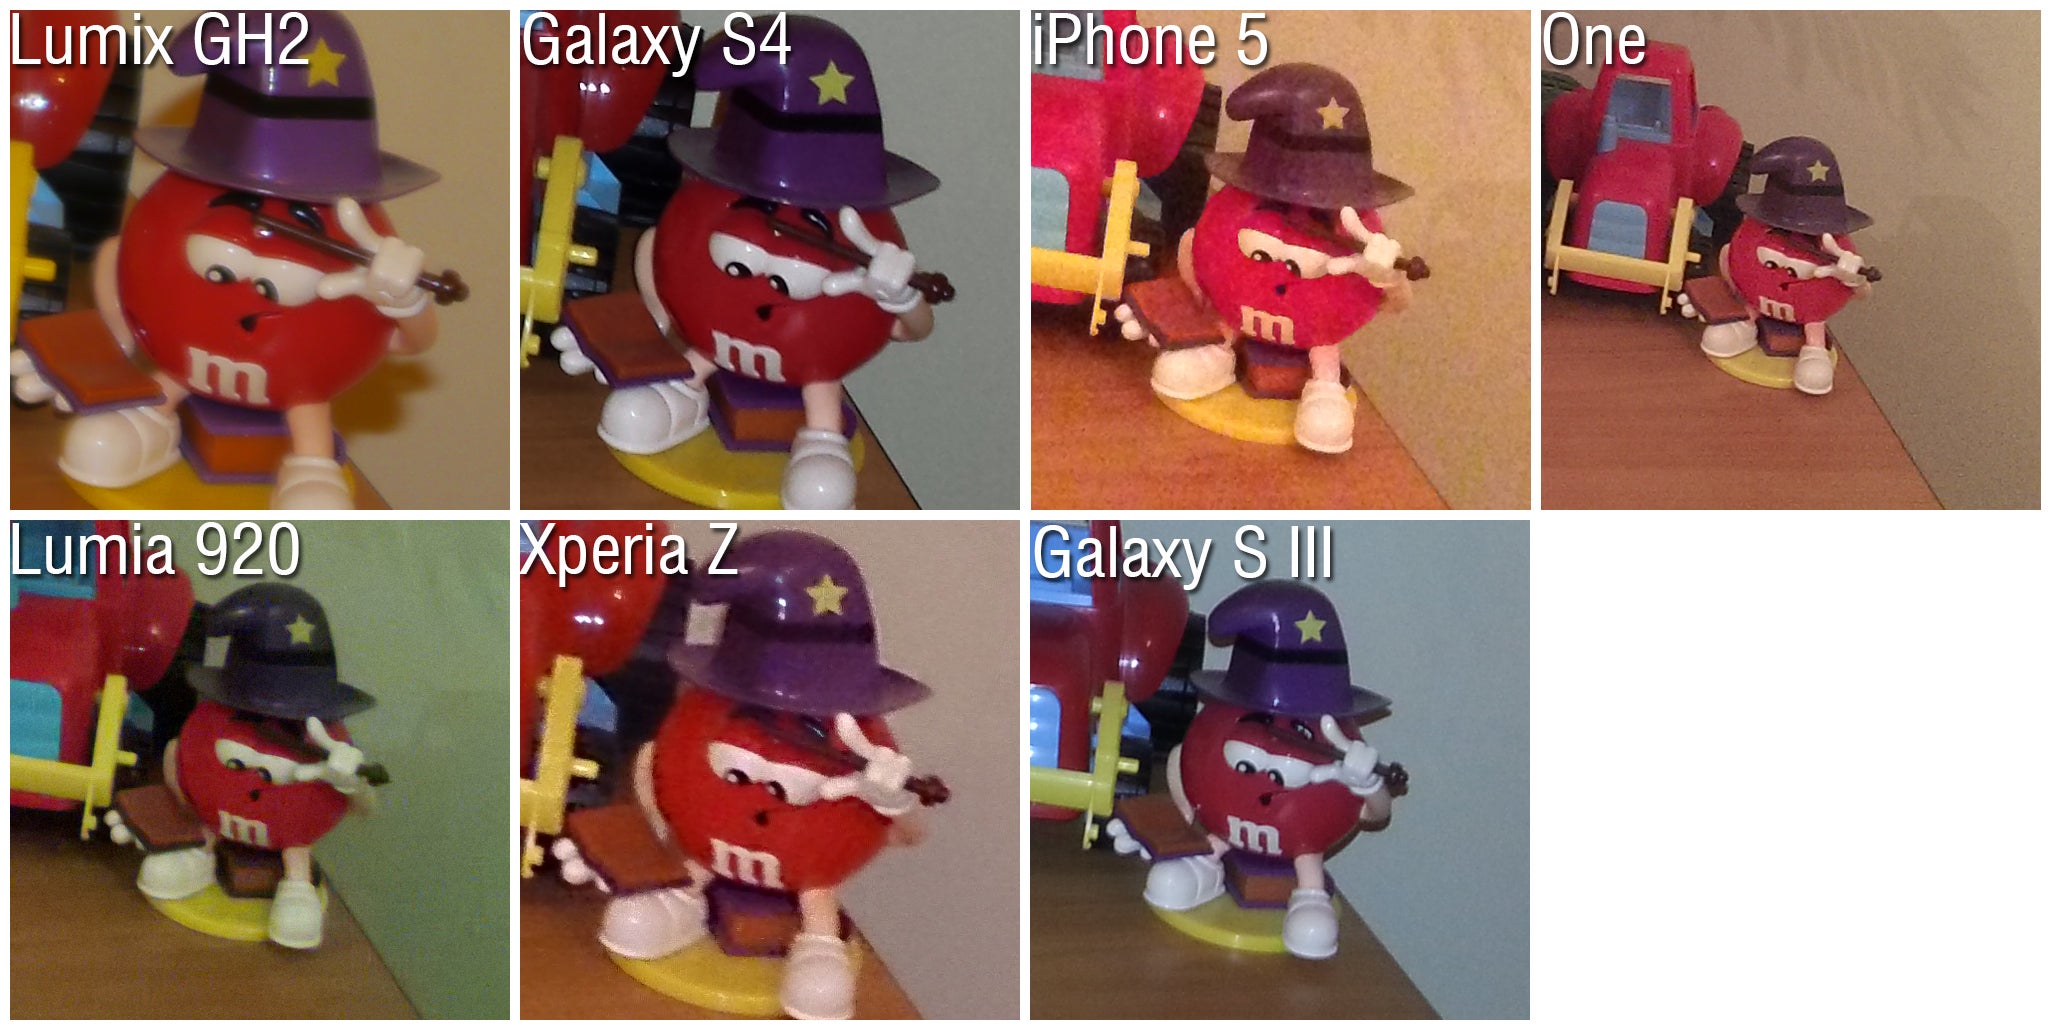 Low light 100% Crops - Camera comparison: Samsung Galaxy S4 vs HTC One, Sony Xperia Z,  iPhone 5, Nokia Lumia 920 and Galaxy S III